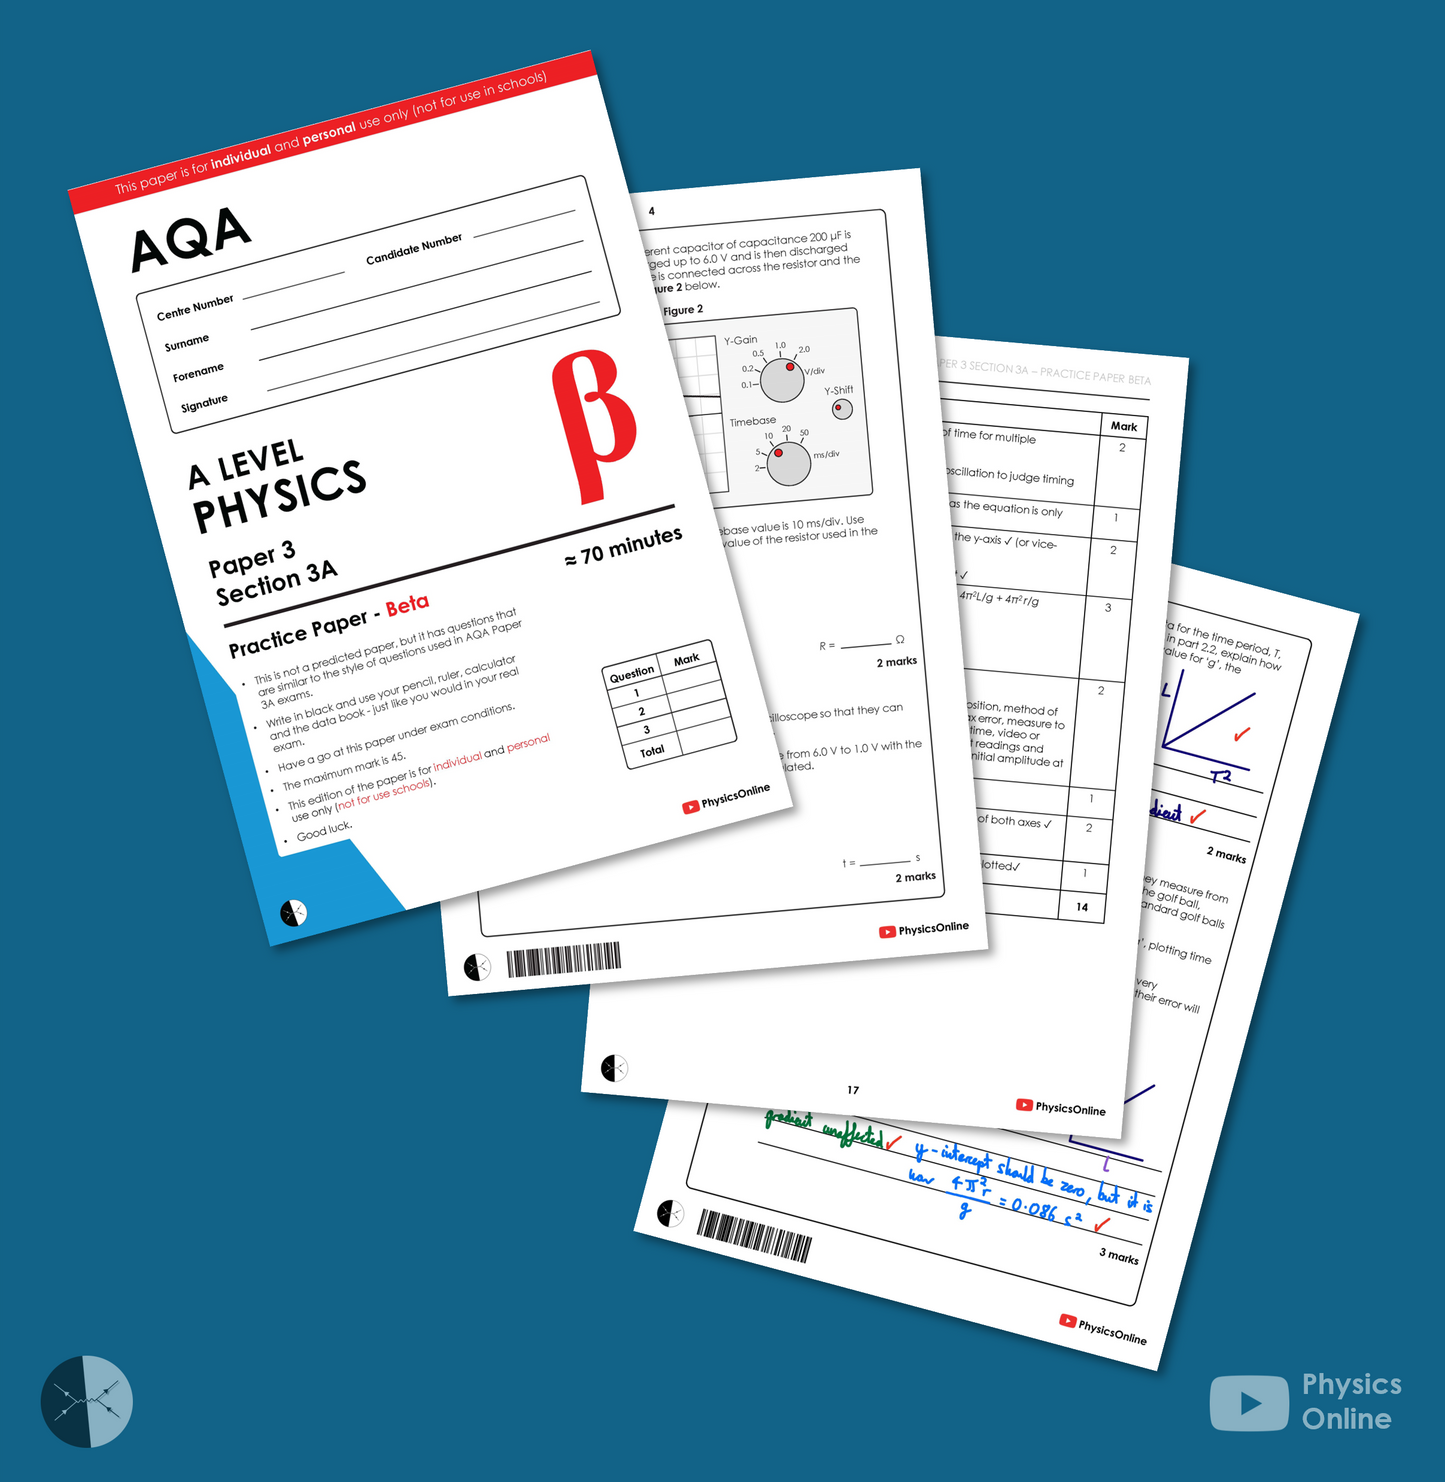 AQA Practice Paper | 3A - Multipack | Individual Issue | A Level Physics